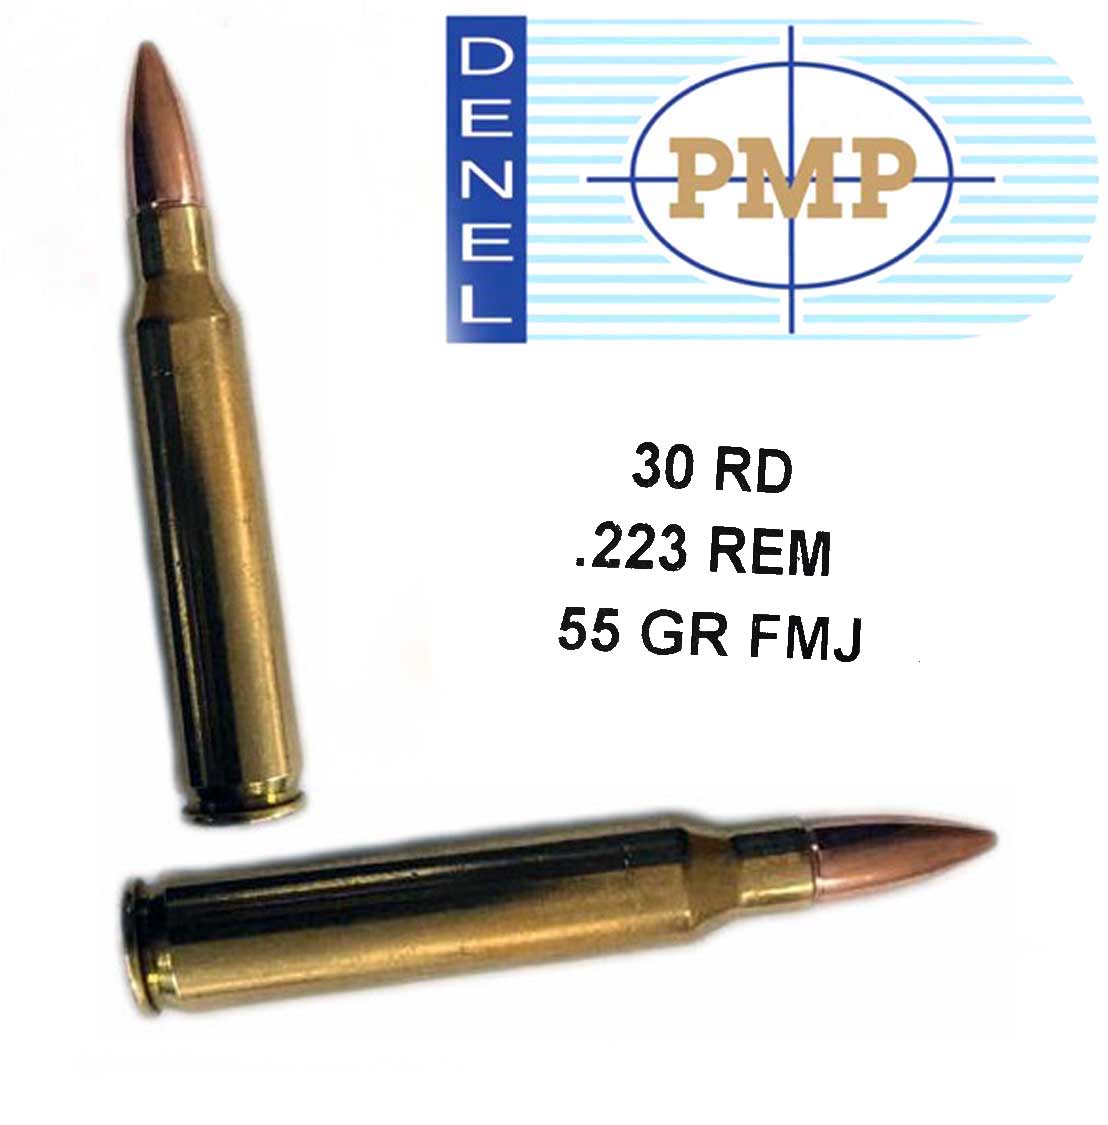 PMP .223 55gr Brass case, FMJ, Boxer primed. Box of 1020, containing individual 30rd boxes|